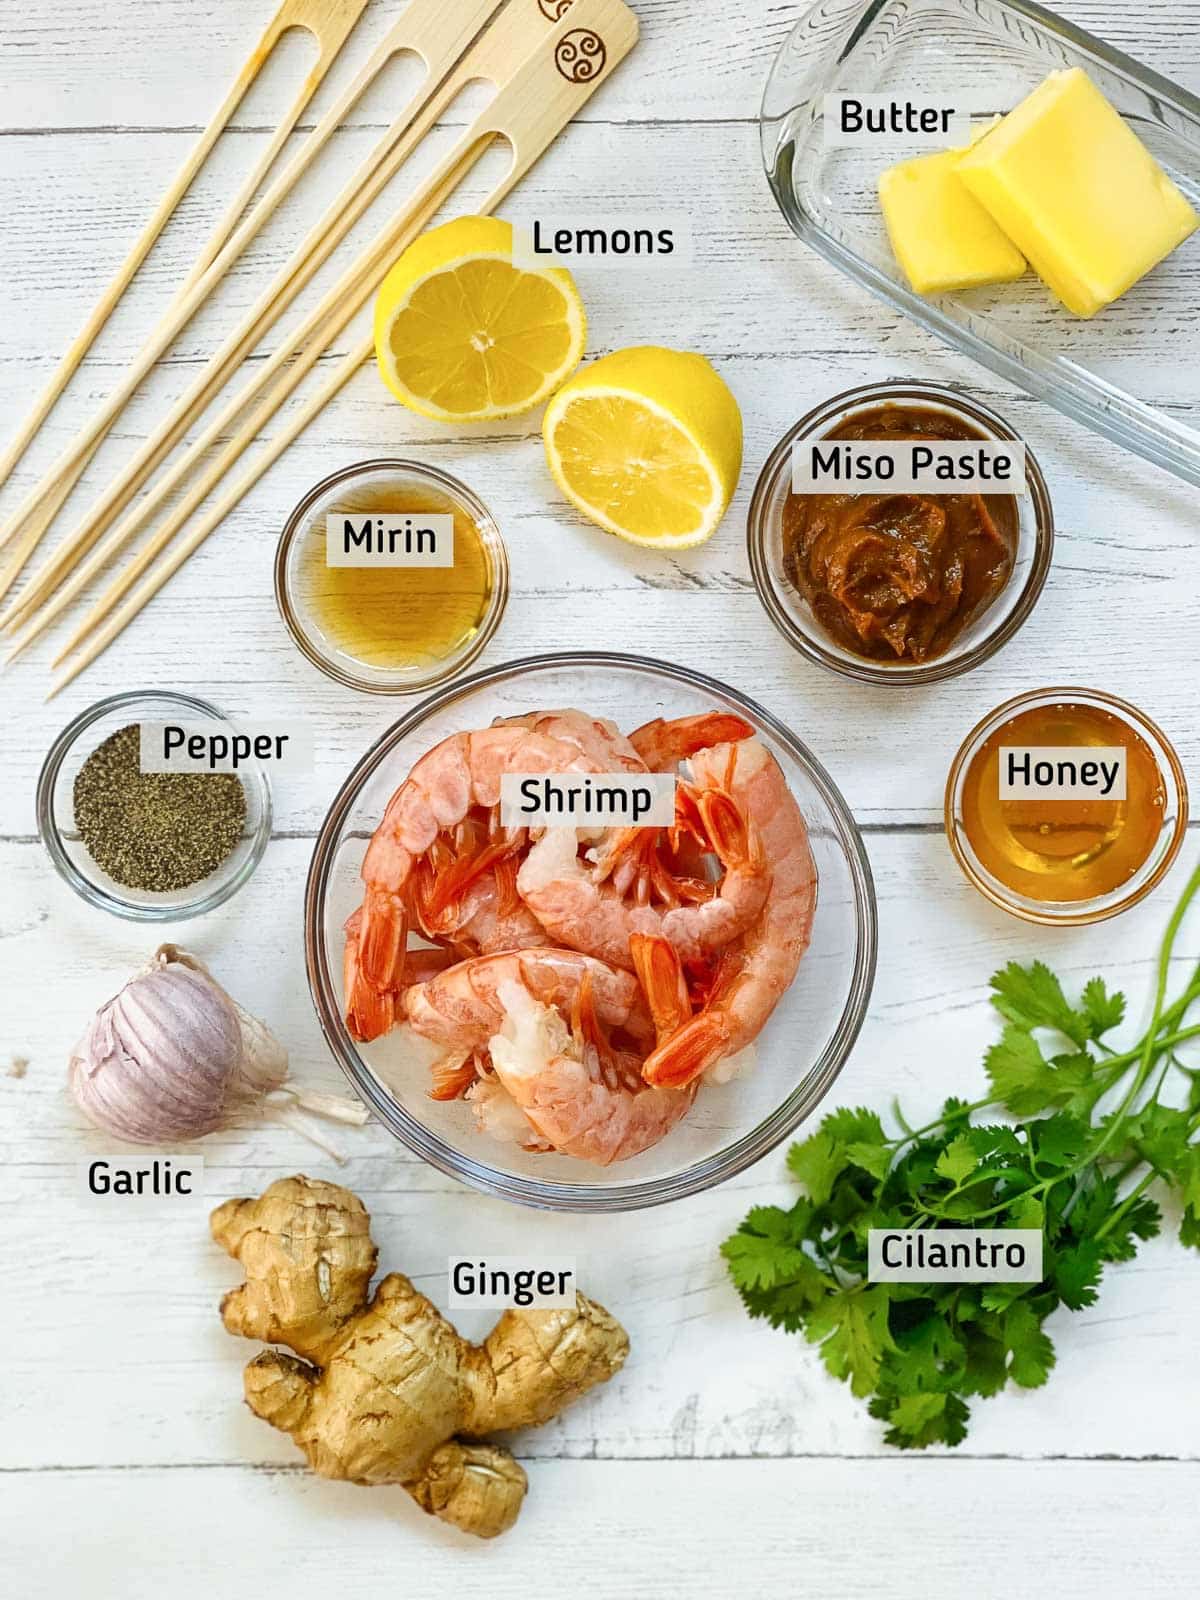 Labeled ingredients for making shrimp with miso sauce on top of a white board.